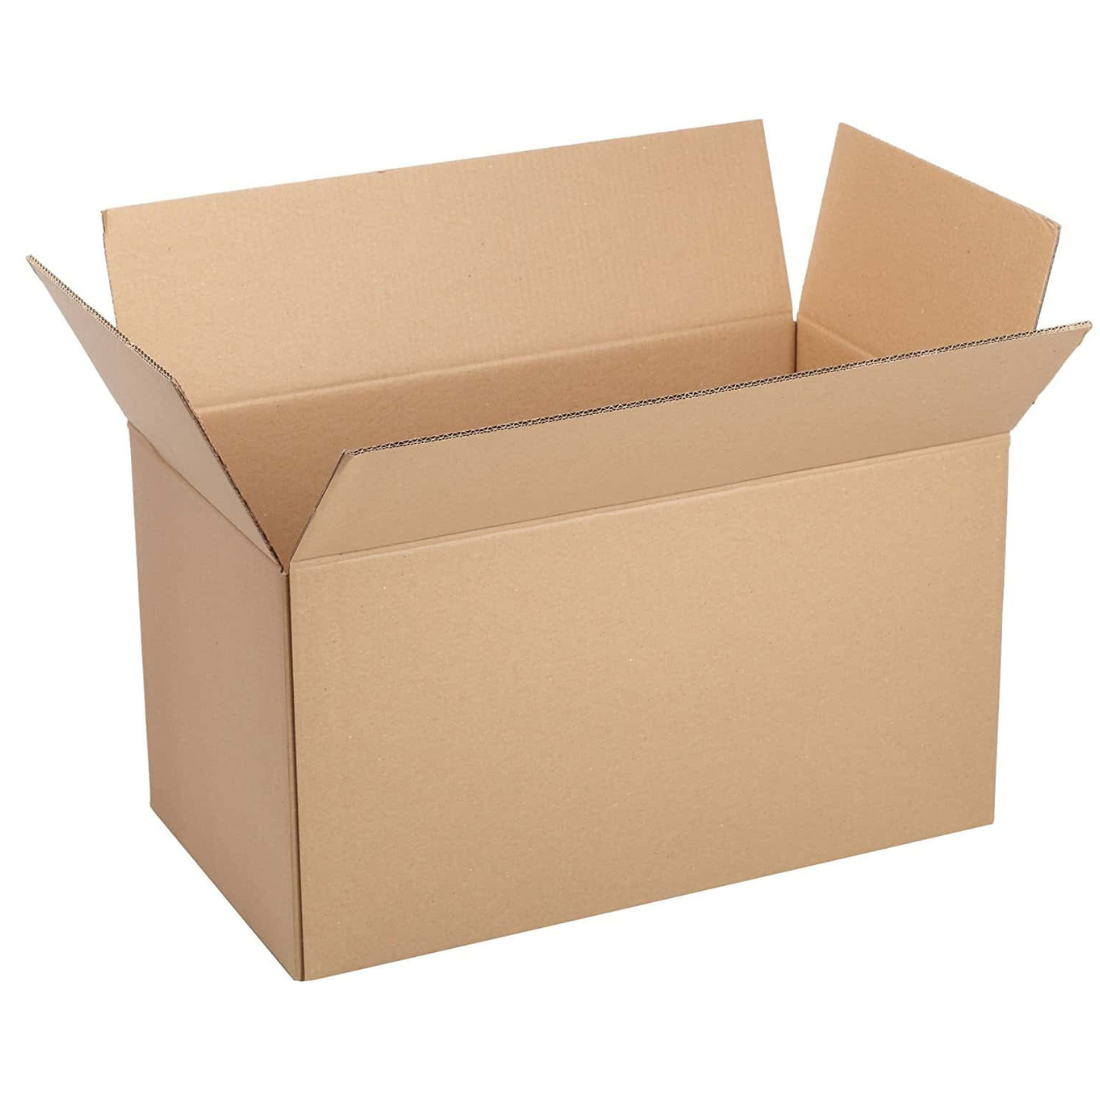 3 Ply Brown Corrugated Box for Packing (13.25X7.5X6 inches) - Pack of 20 Boxes